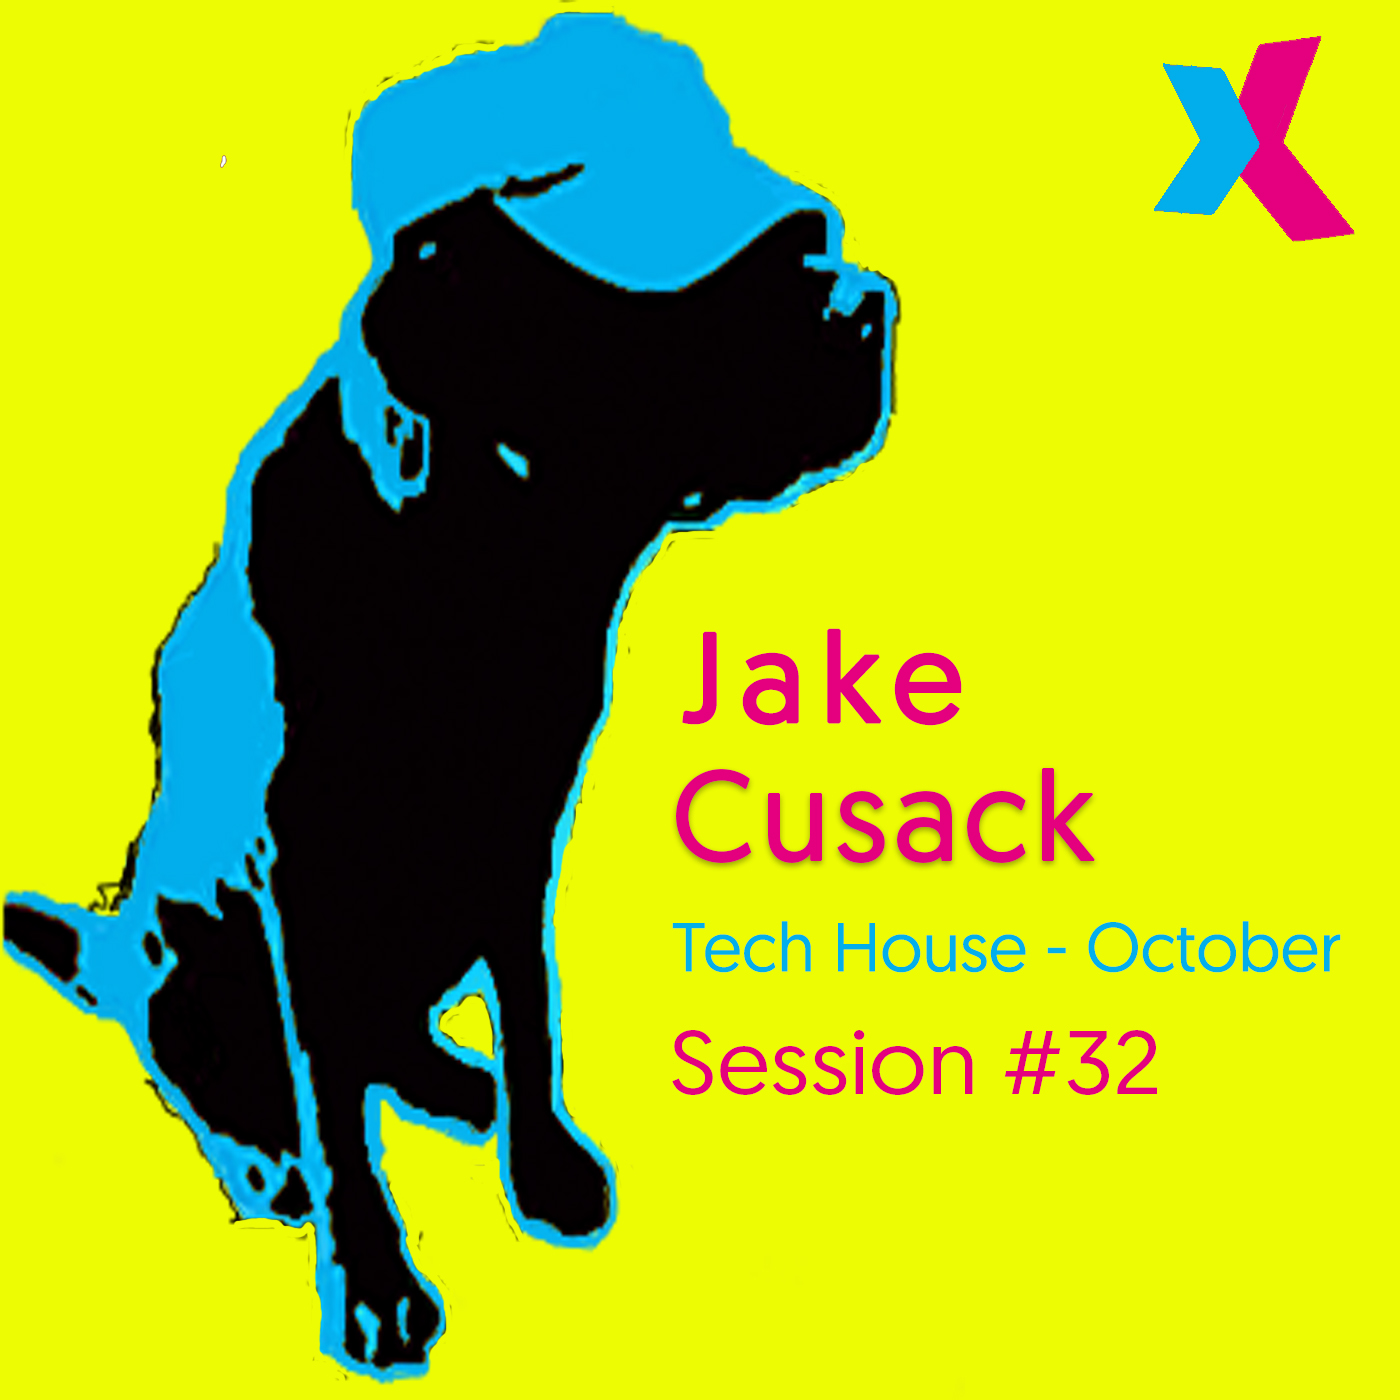 Jake Cusack - Tech house - October - Session 32